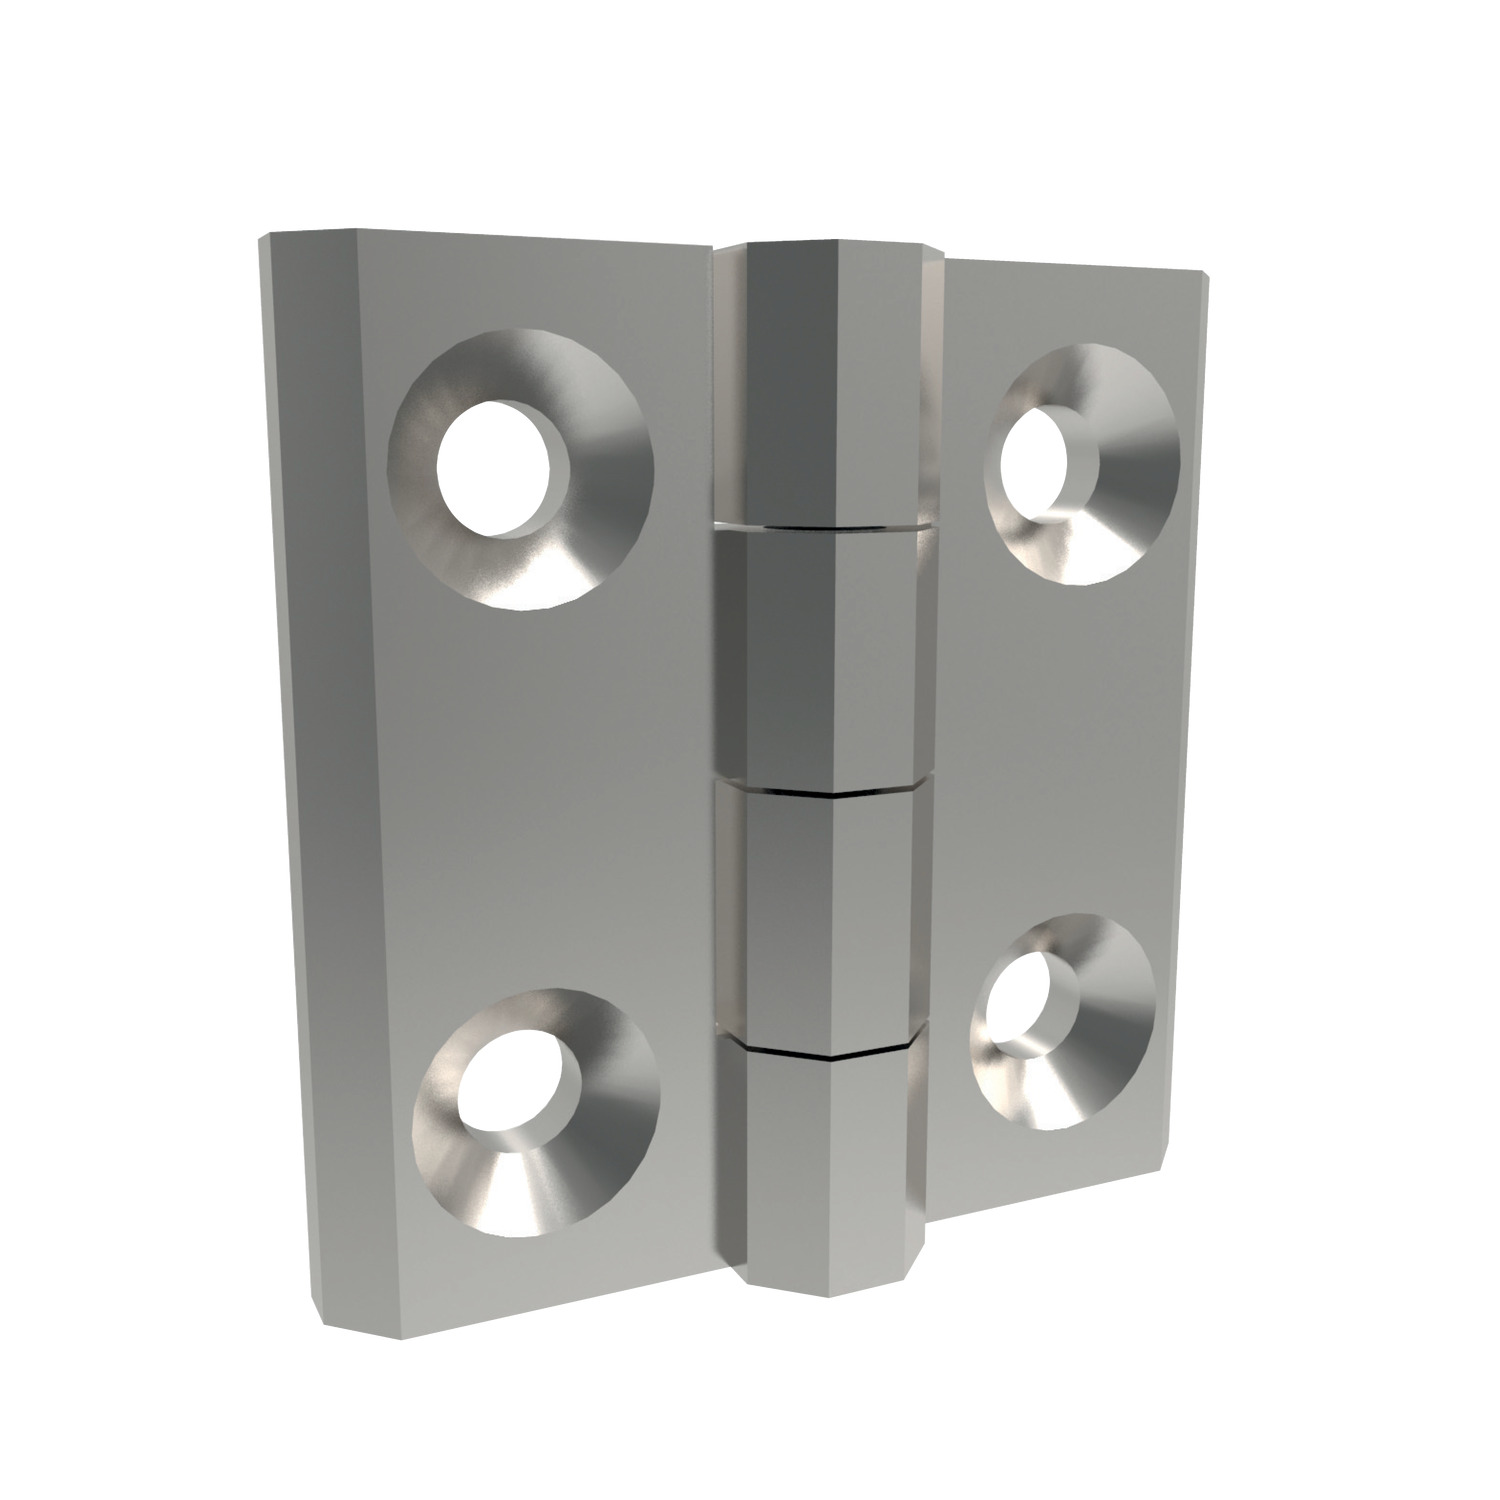 Surface Mount - Leaf Hinges For plain/flush mounted doors, as well as electrical panels and covers. Opening angle 180°.